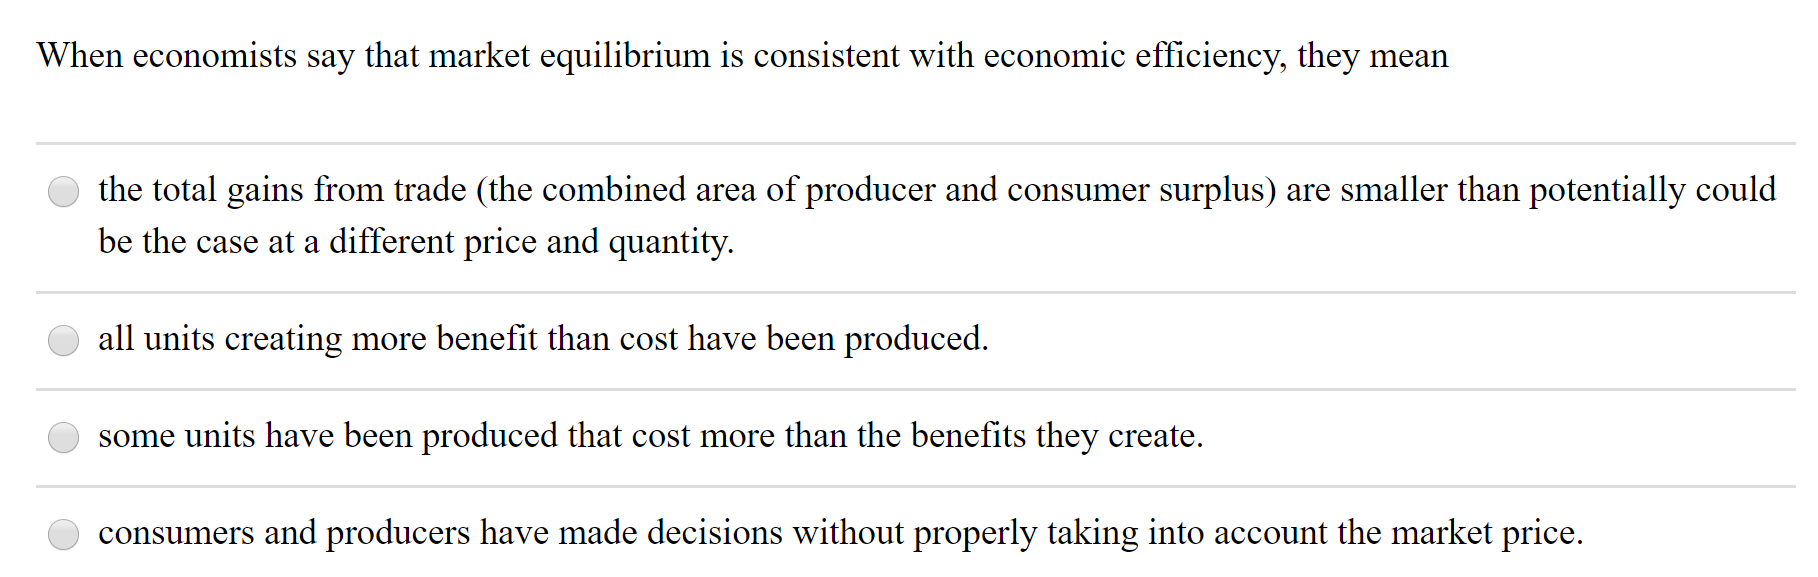 When economists say that market equilibrium is consistent with economic efficiency, they mean
the total gains from trade (the combined area of producer and consumer surplus) are smaller than potentially could
be the case at a different price and quantity.
all units creating more benefit than cost have been produced.
some units have been produced that cost more than the benefits they create.
consumers and producers have made decisions without properly taking into account the market price.
